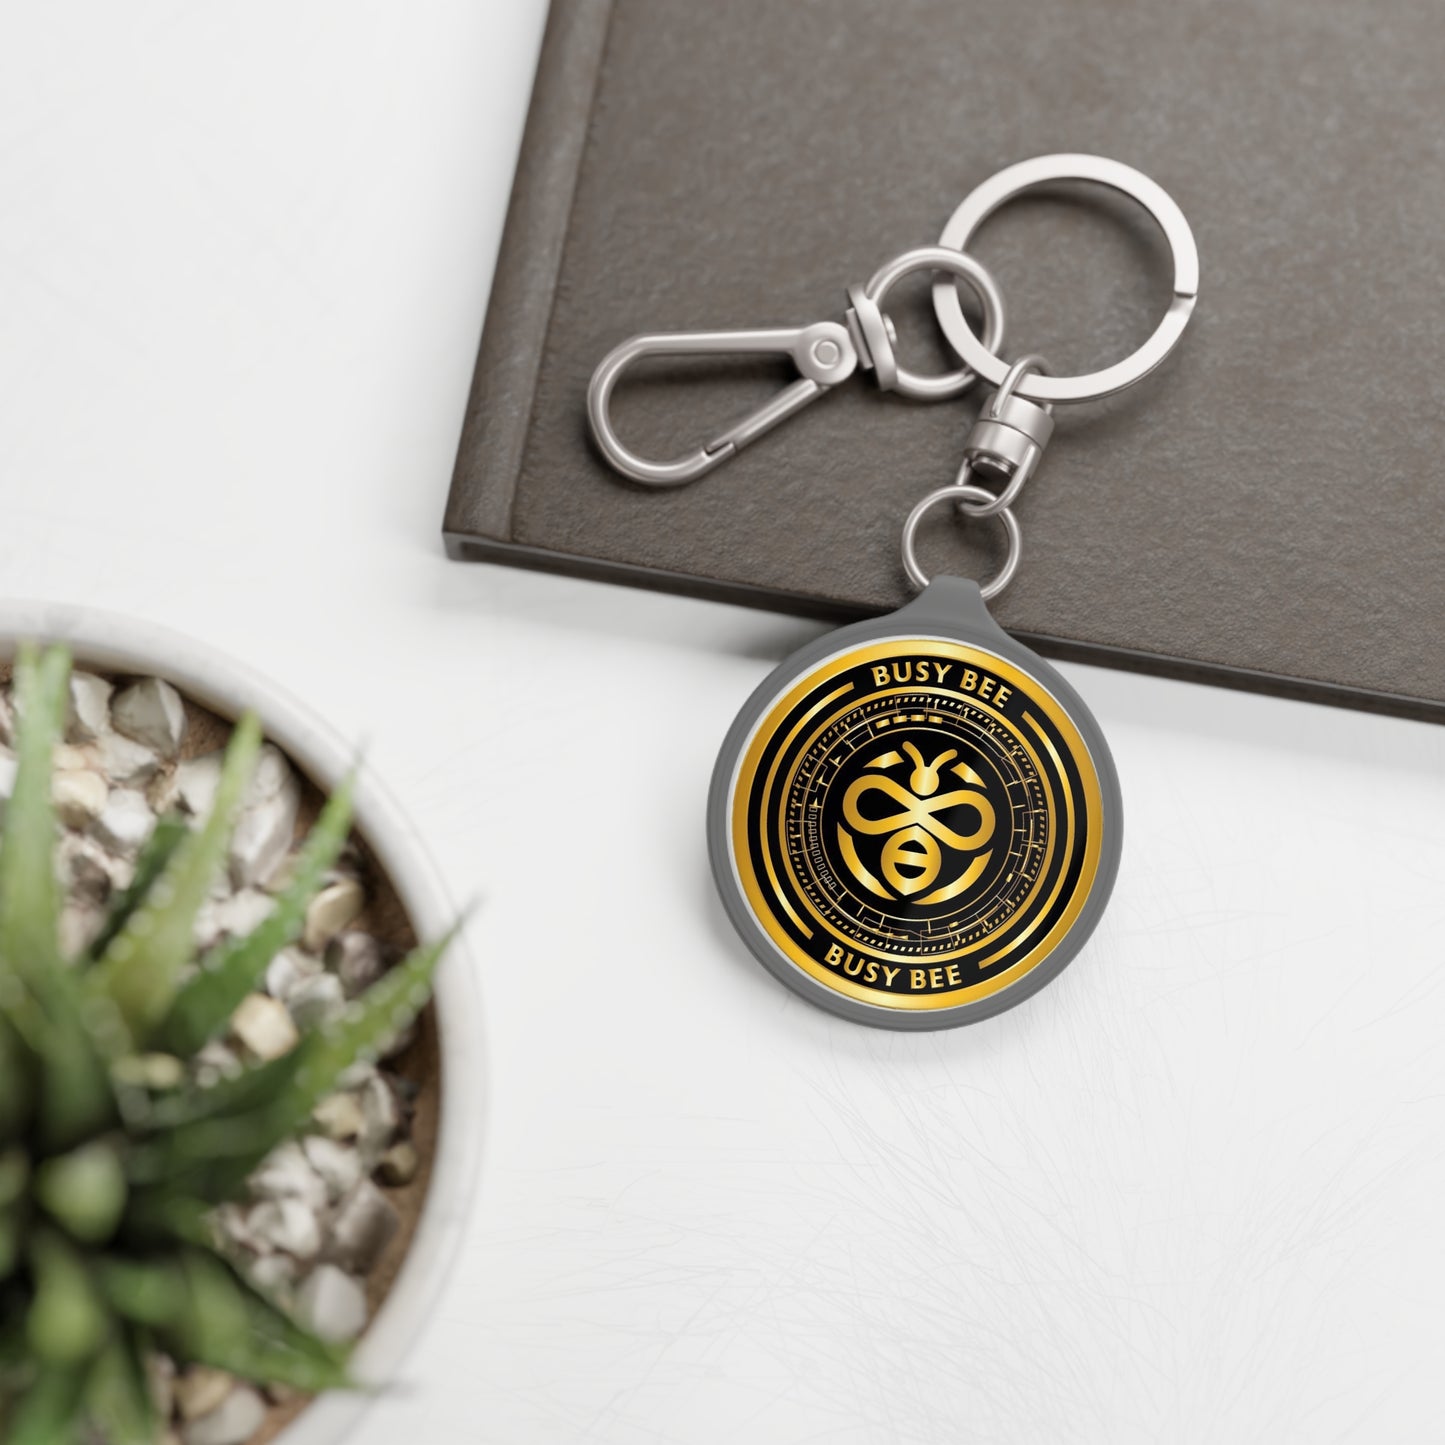 Busy bee Key ring